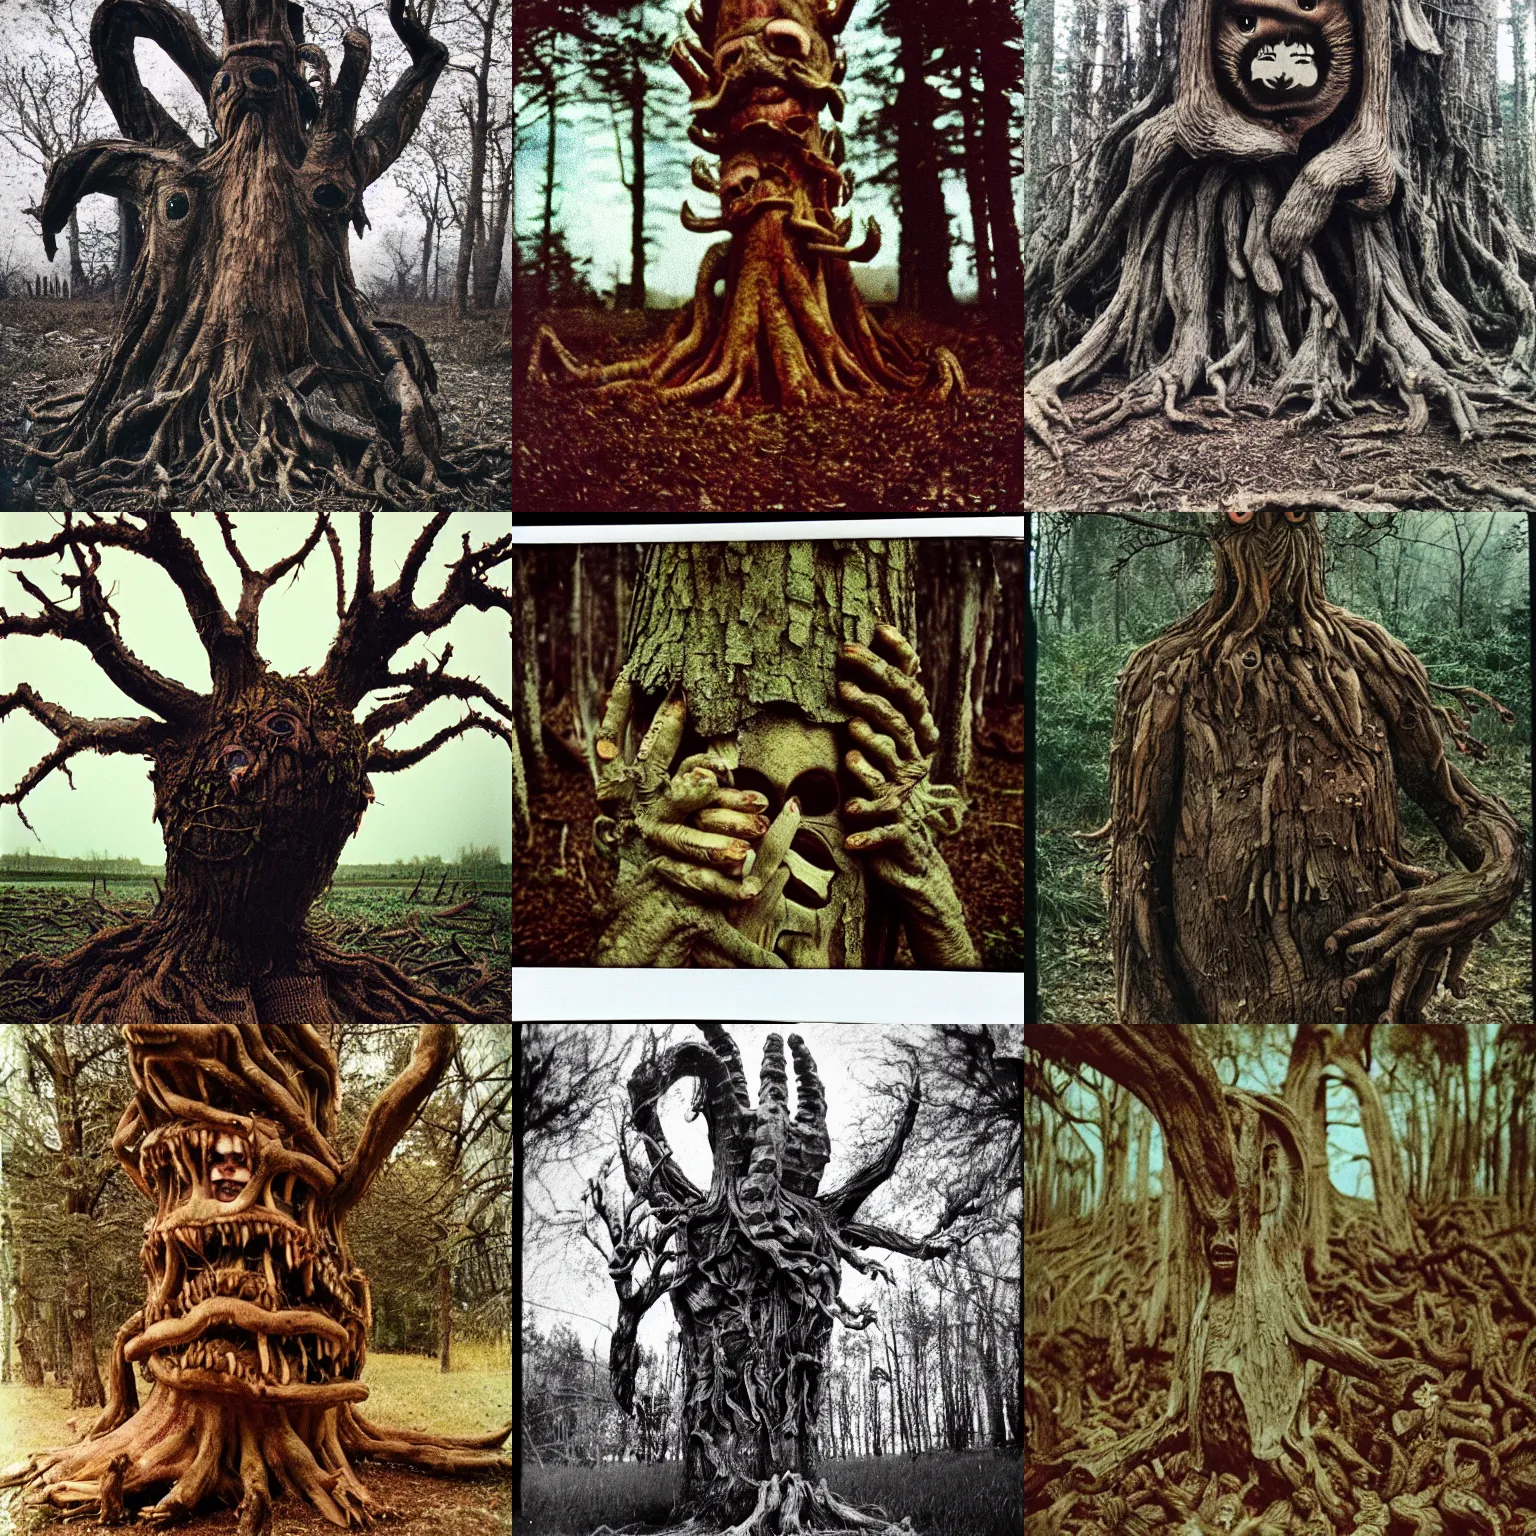 Prompt: a terrifying tree monster with distorted faces made of bark harvesting mushrooms, lovecratftian horror, pans labyrinth, shot on expired instamatic film